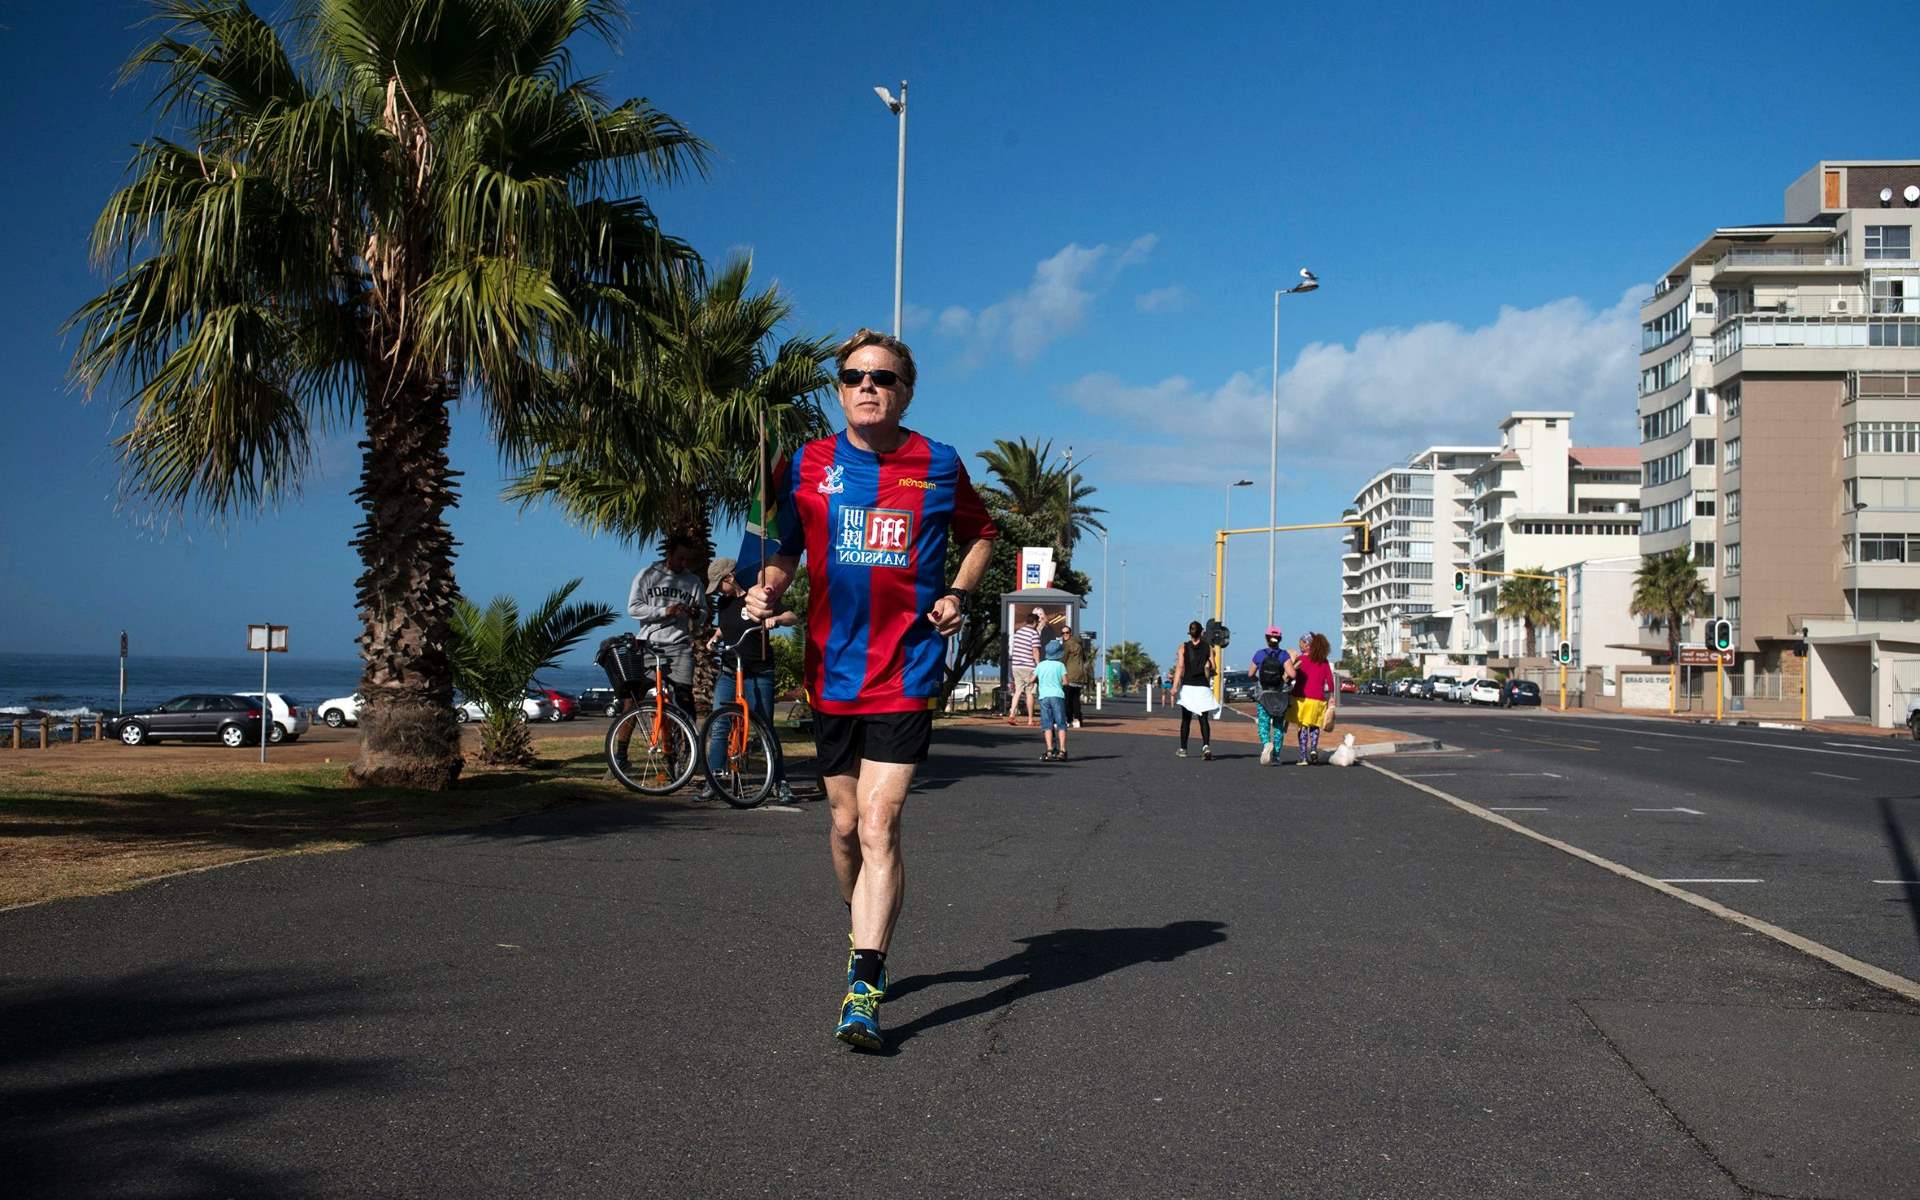 Eddie Izzard’s Remarkable Feat: Conquering 27 Marathons In 27 Days Across South Africa